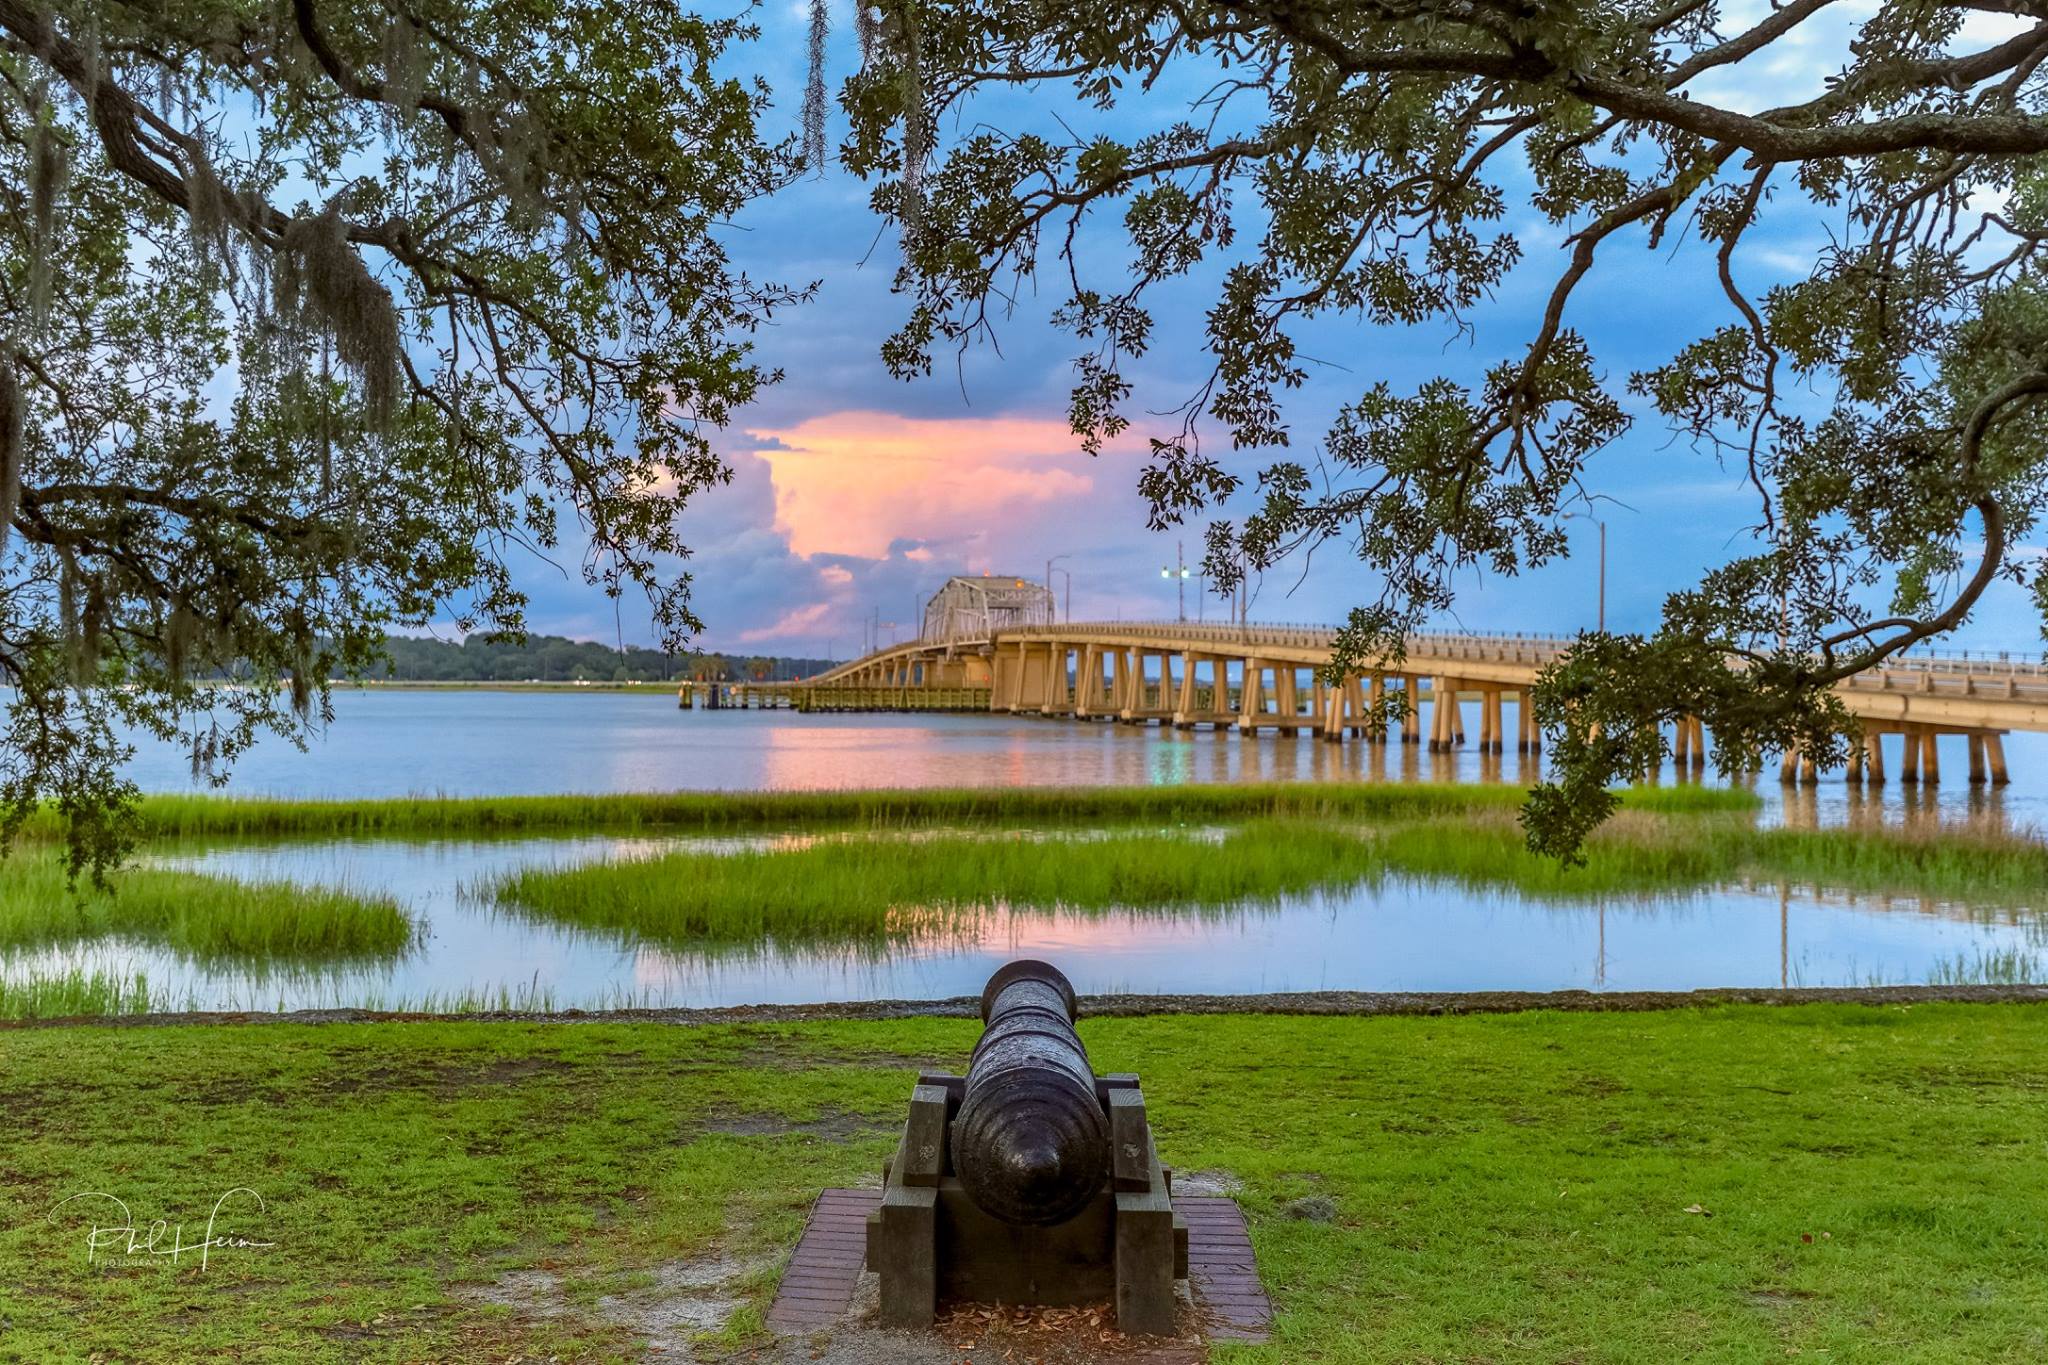 Beaufort named Best Small Town in South Carolina Explore Beaufort SC